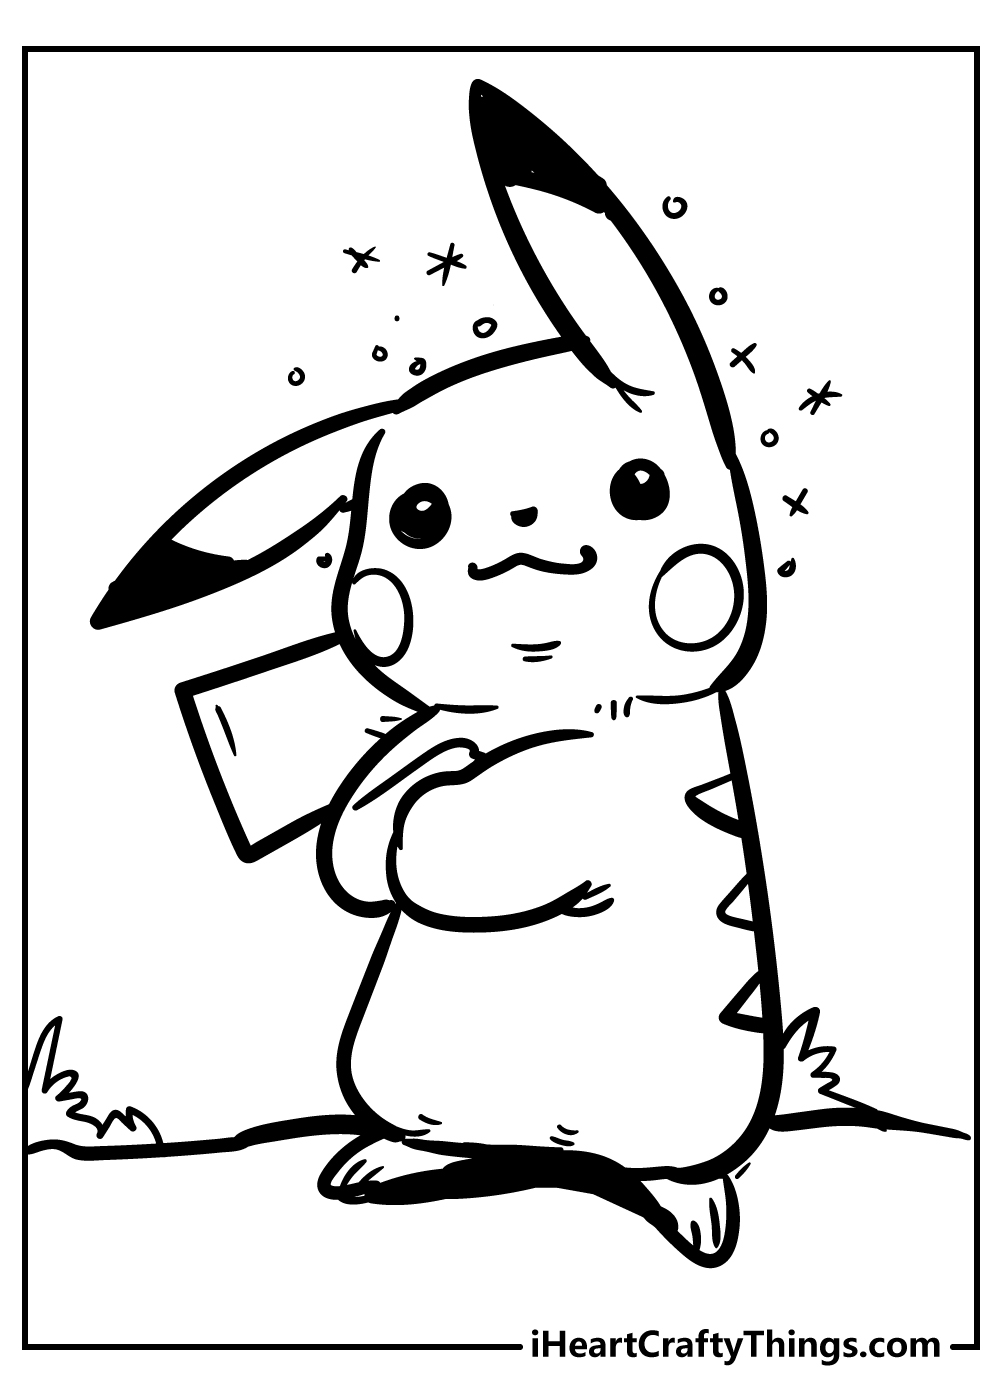 Pikachu coloring pages for adults free printable